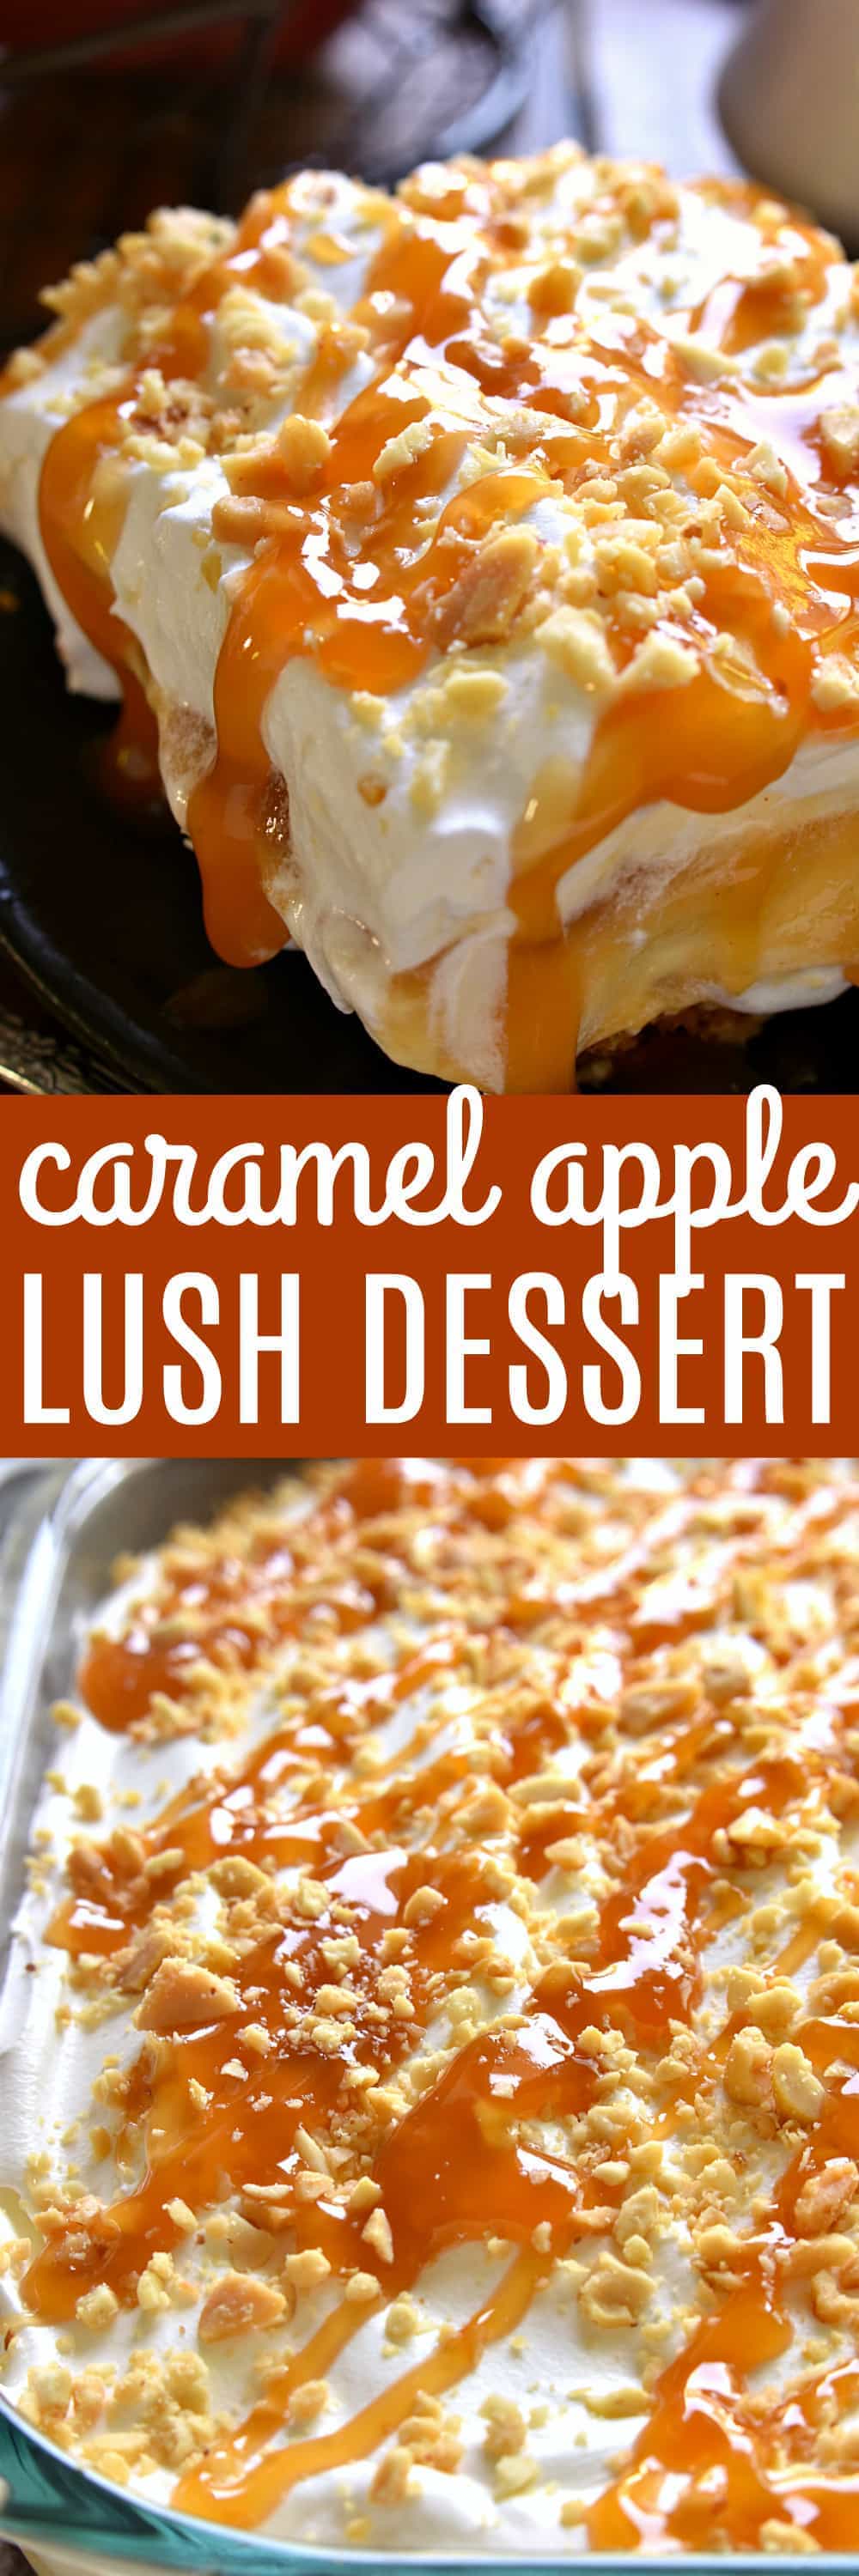 This Caramel Apple Lush Dessert is EVERYTHING! Layer upon layer of rich, creamy caramel apple goodness...this dessert is guaranteed to be a hit everywhere it goes!